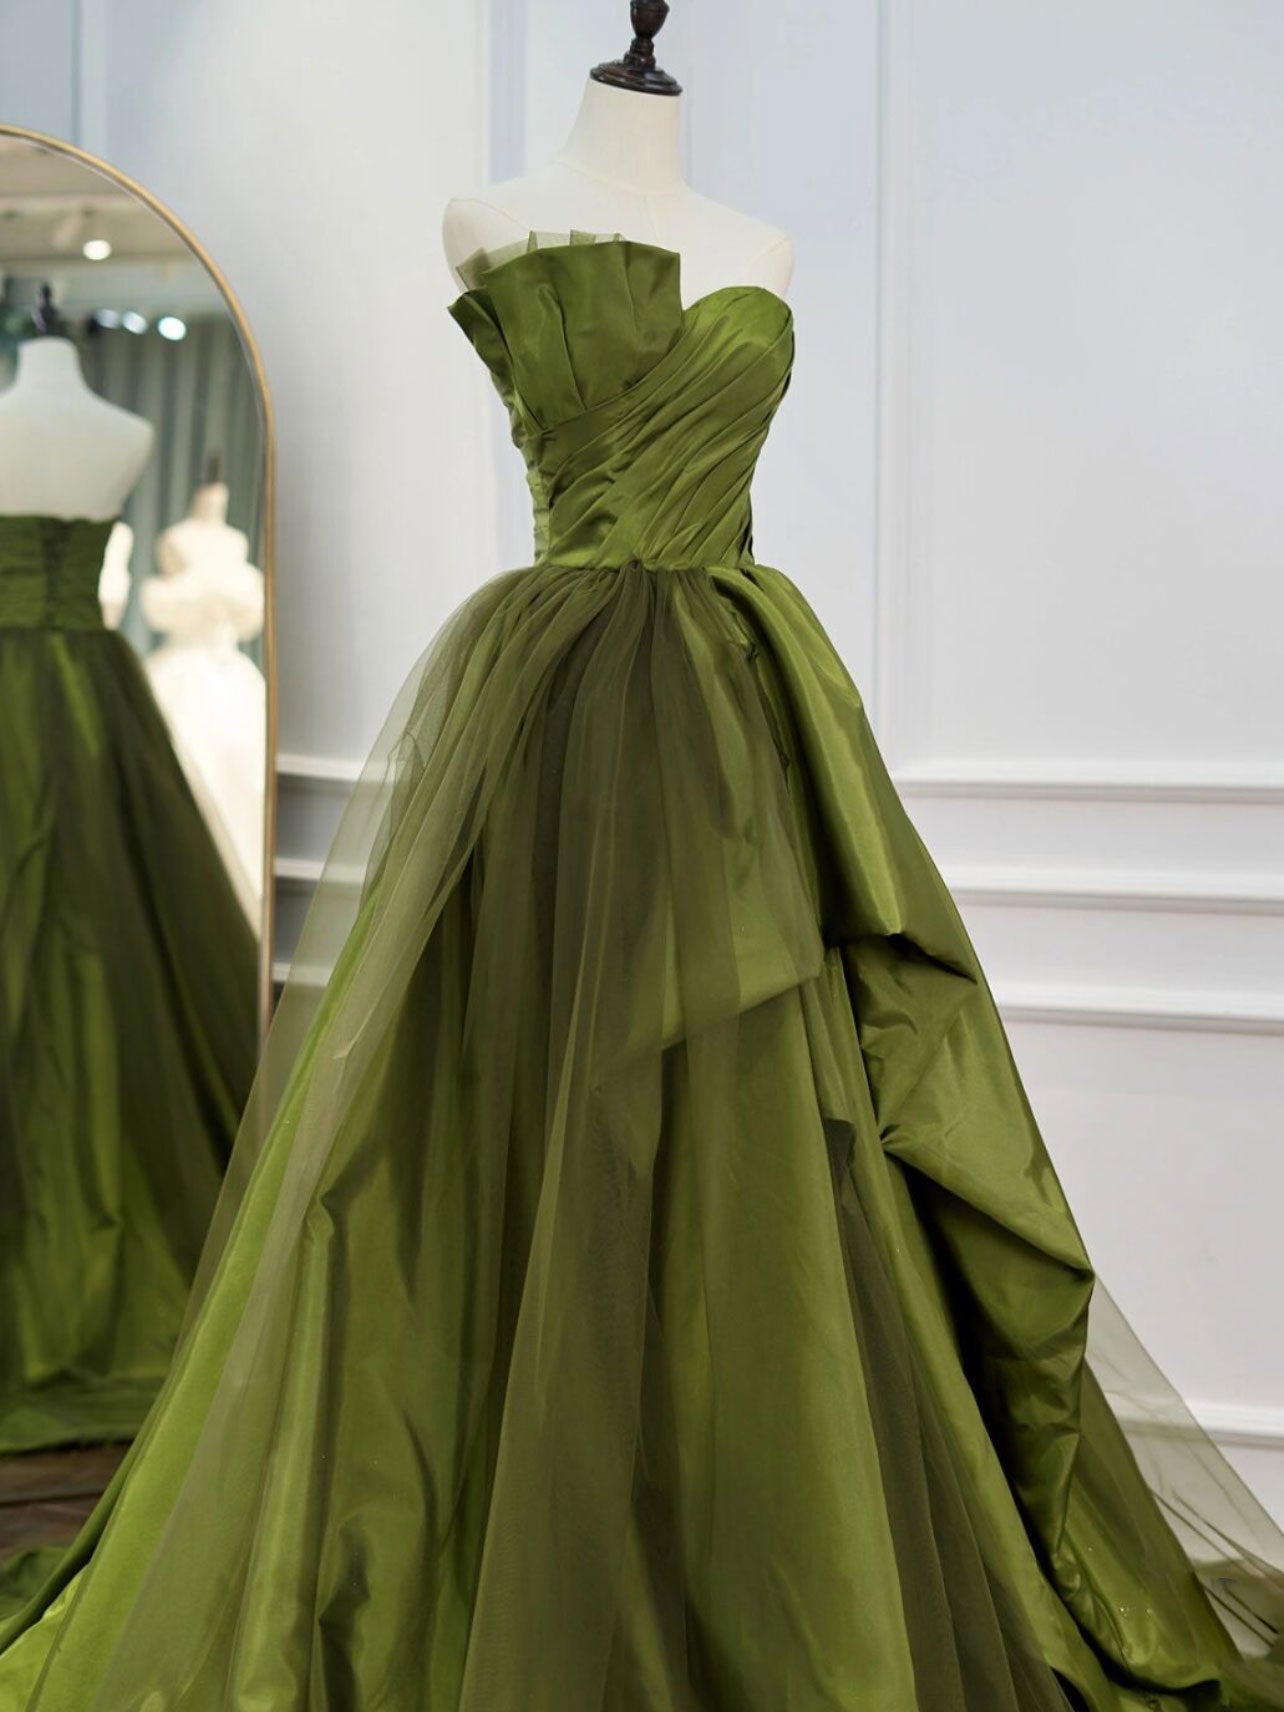 Bridesmaid Dresses Beach Weddings, Green Ruffle Tiered Prom Dresses Strapless, Green Long Party Dress